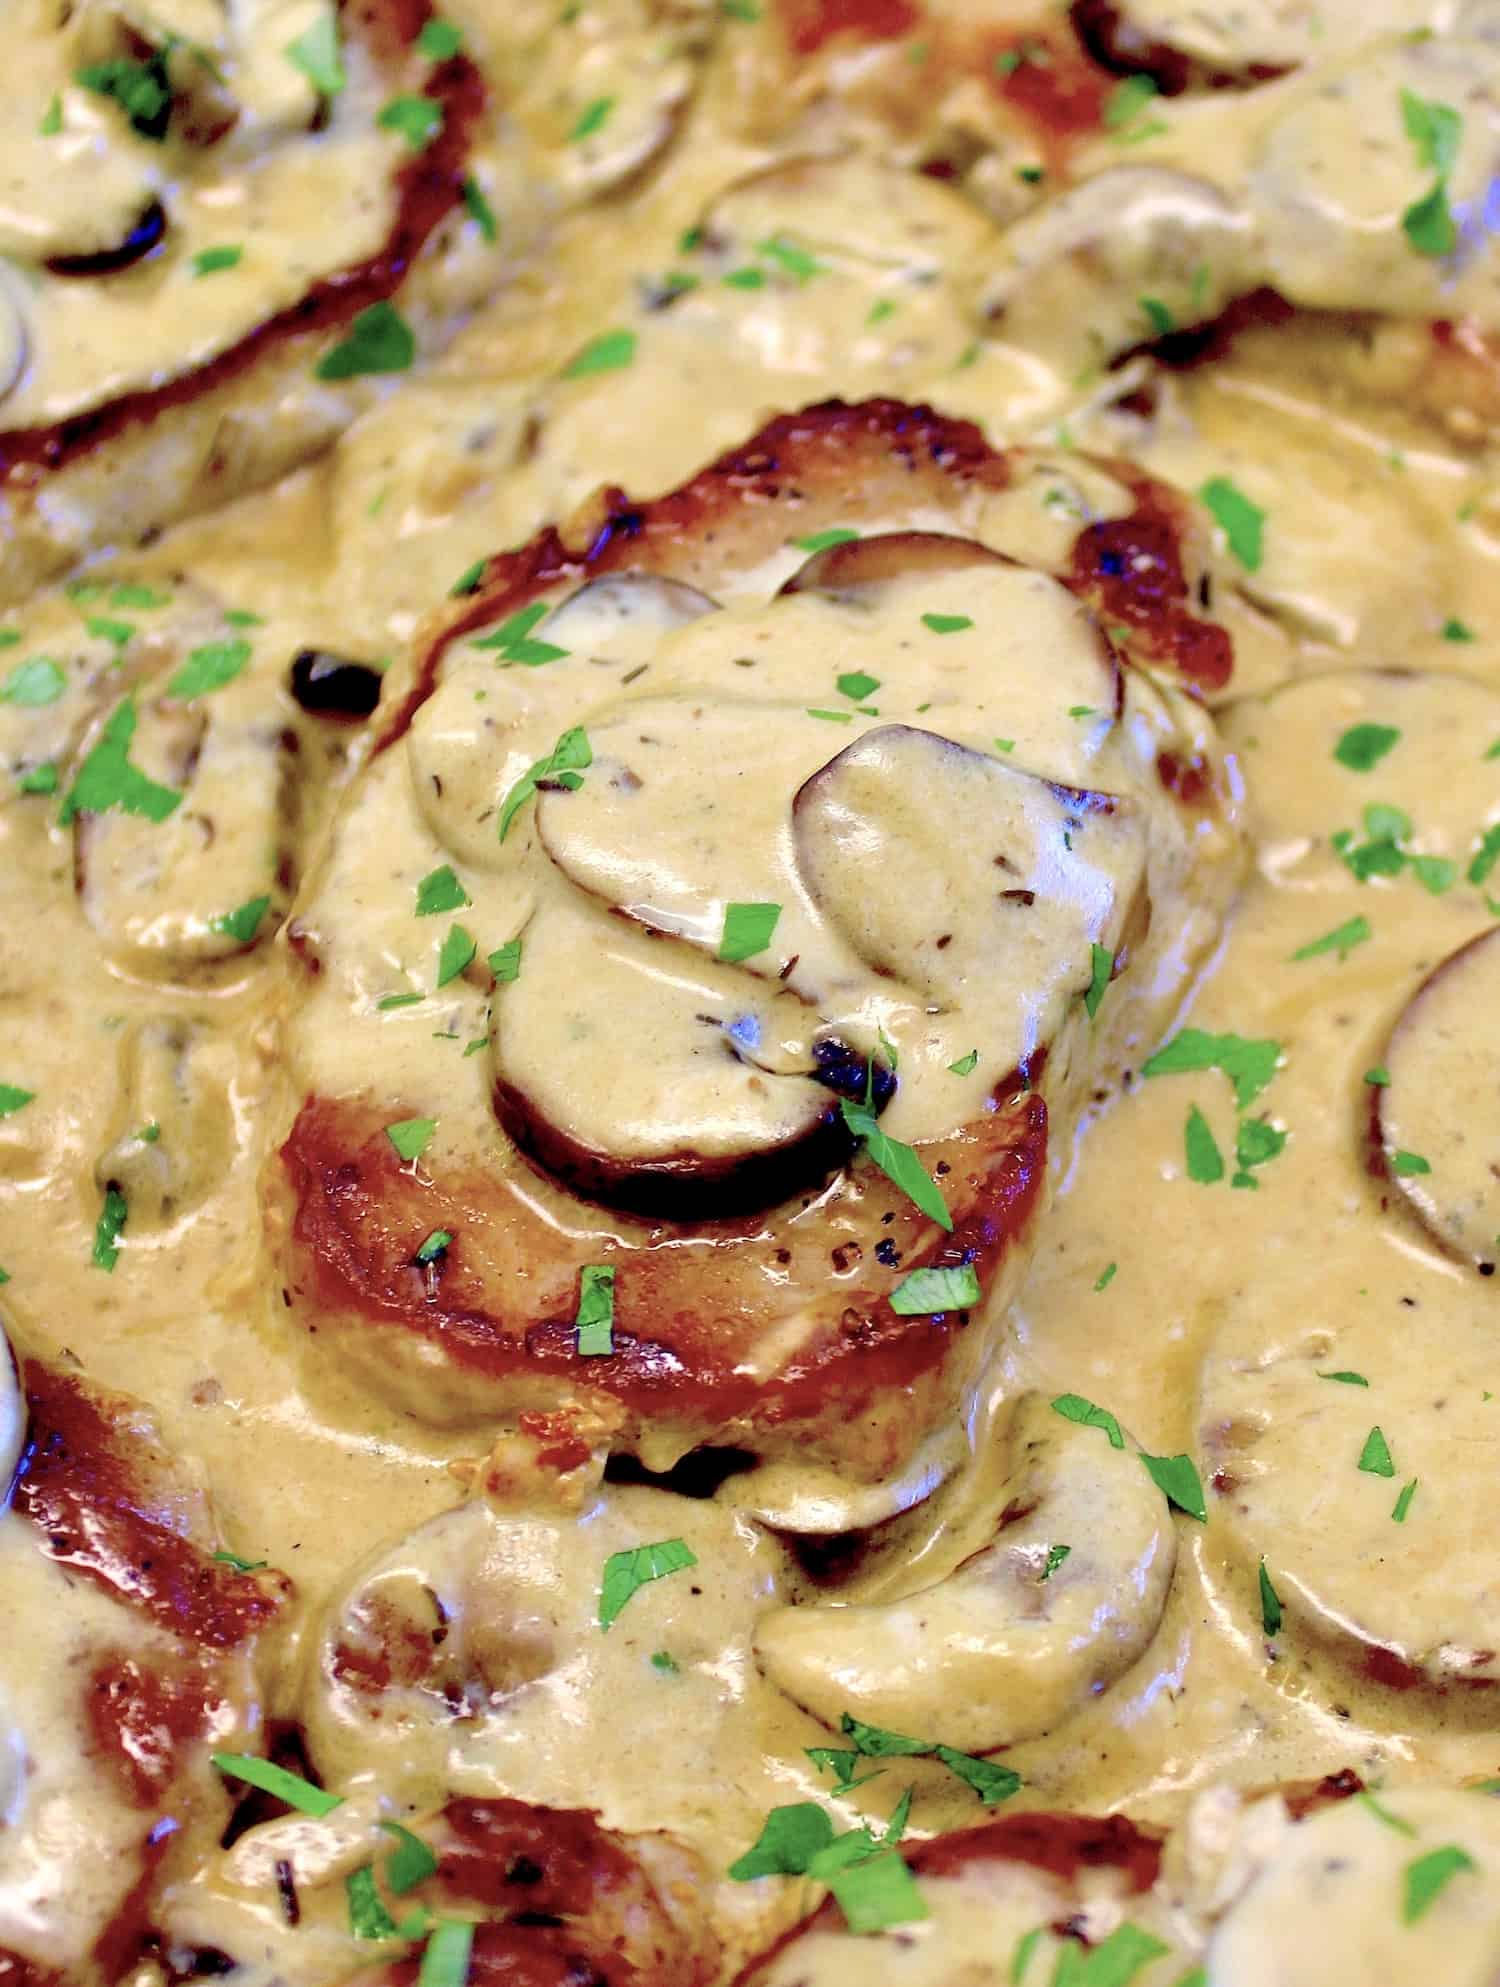 Smothered Pork Chops with mushrooms and gravy